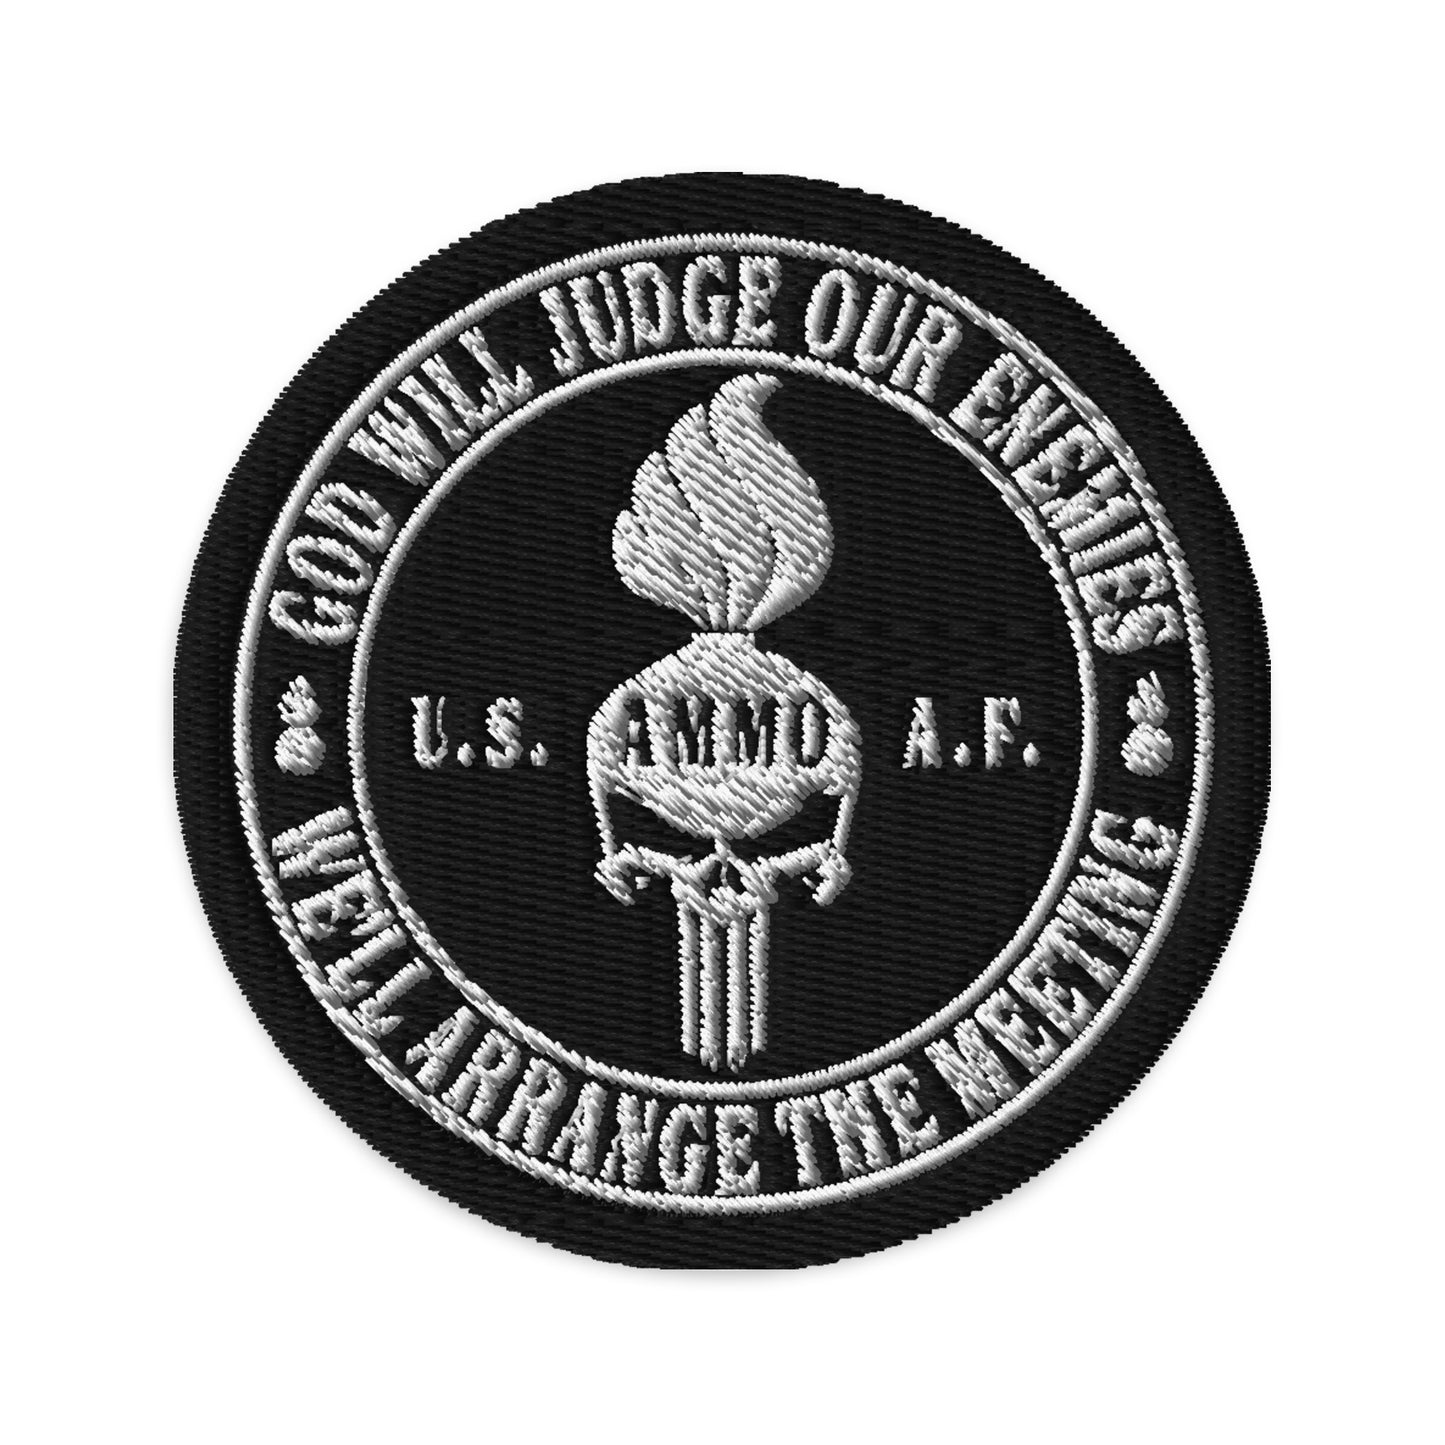 USAF AMMO Punisher Pisspot God Will Judge Our Enemies Embroidered Patches